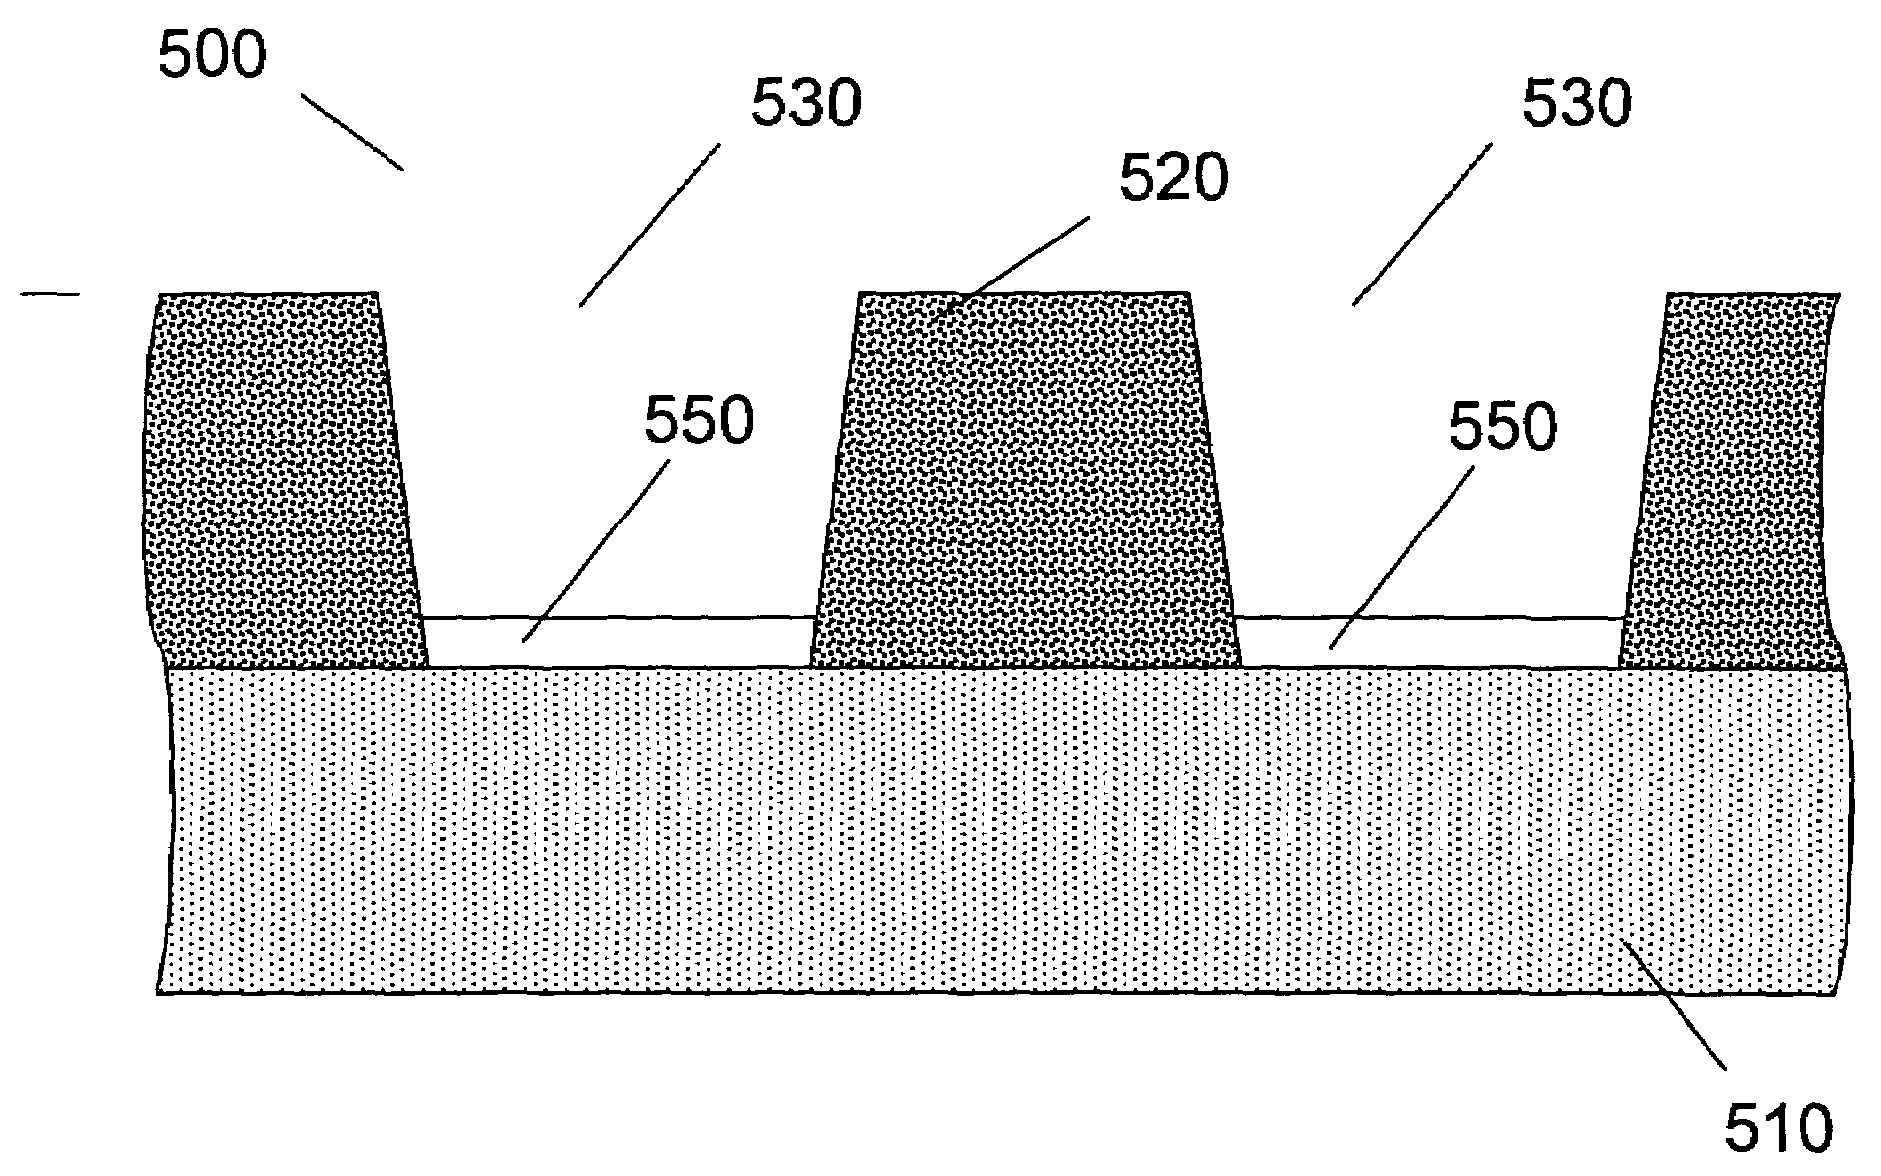 Deposition of silicon-containing films from hexachlorodisilane